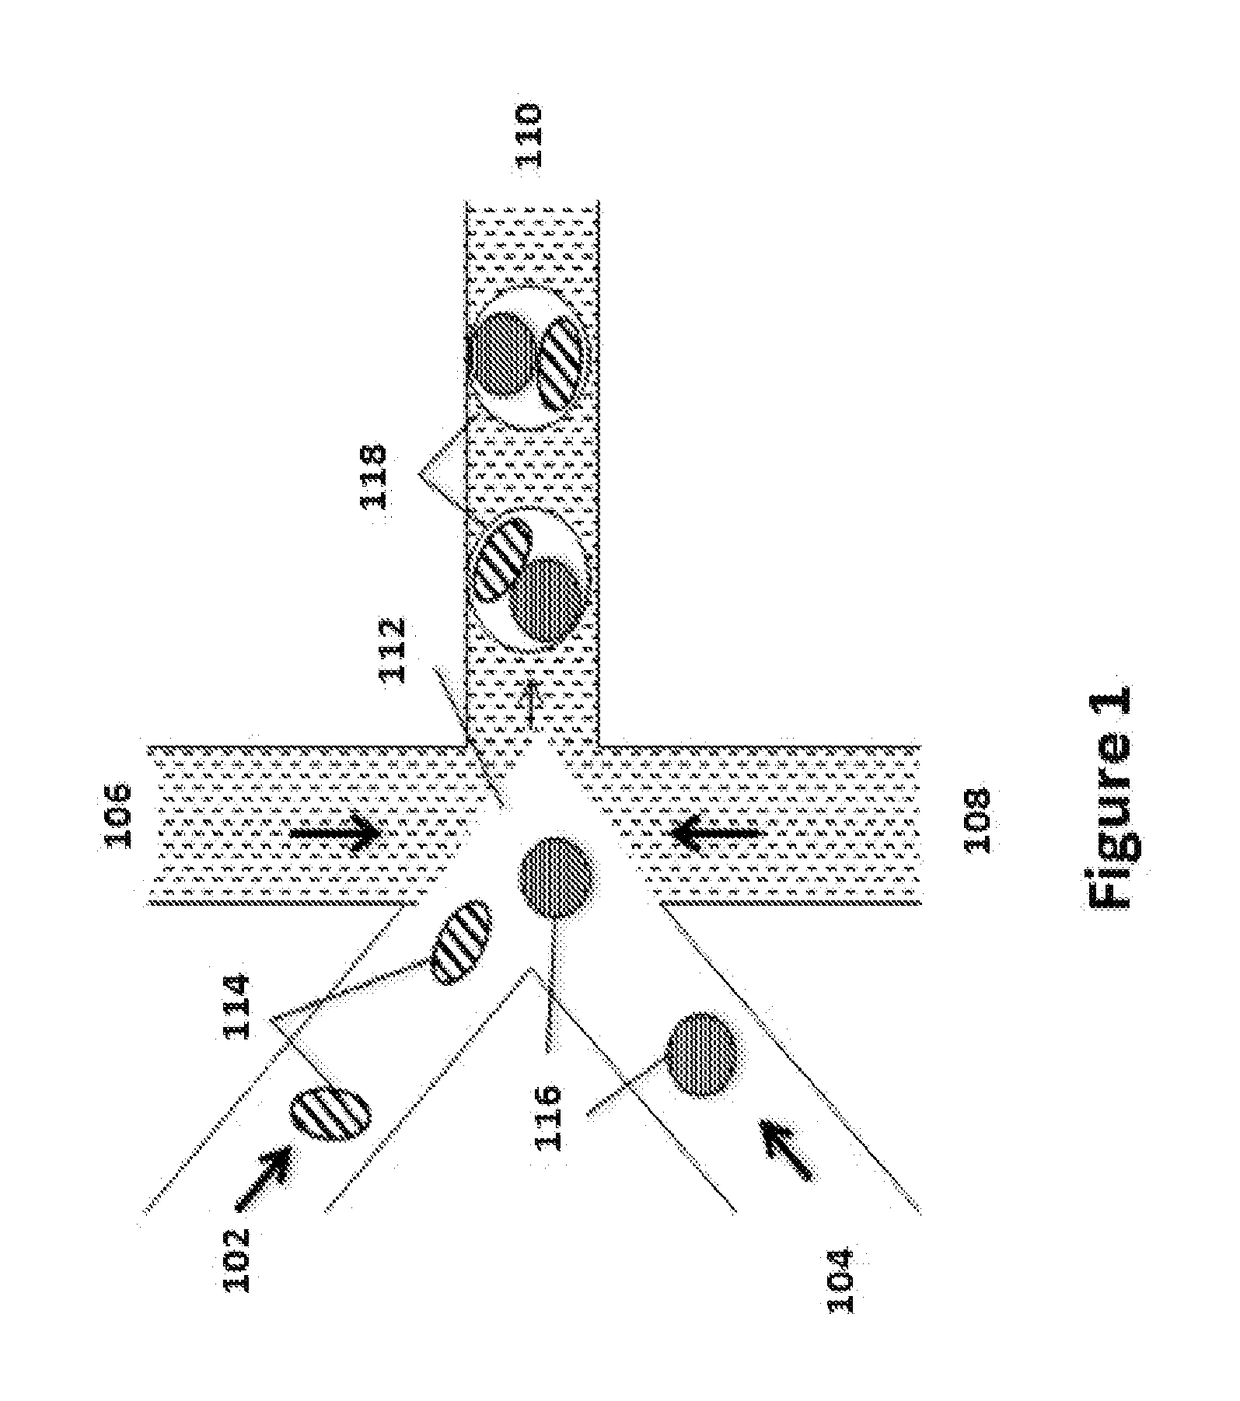 Method and systems for high throughput single cell genetic manipulation